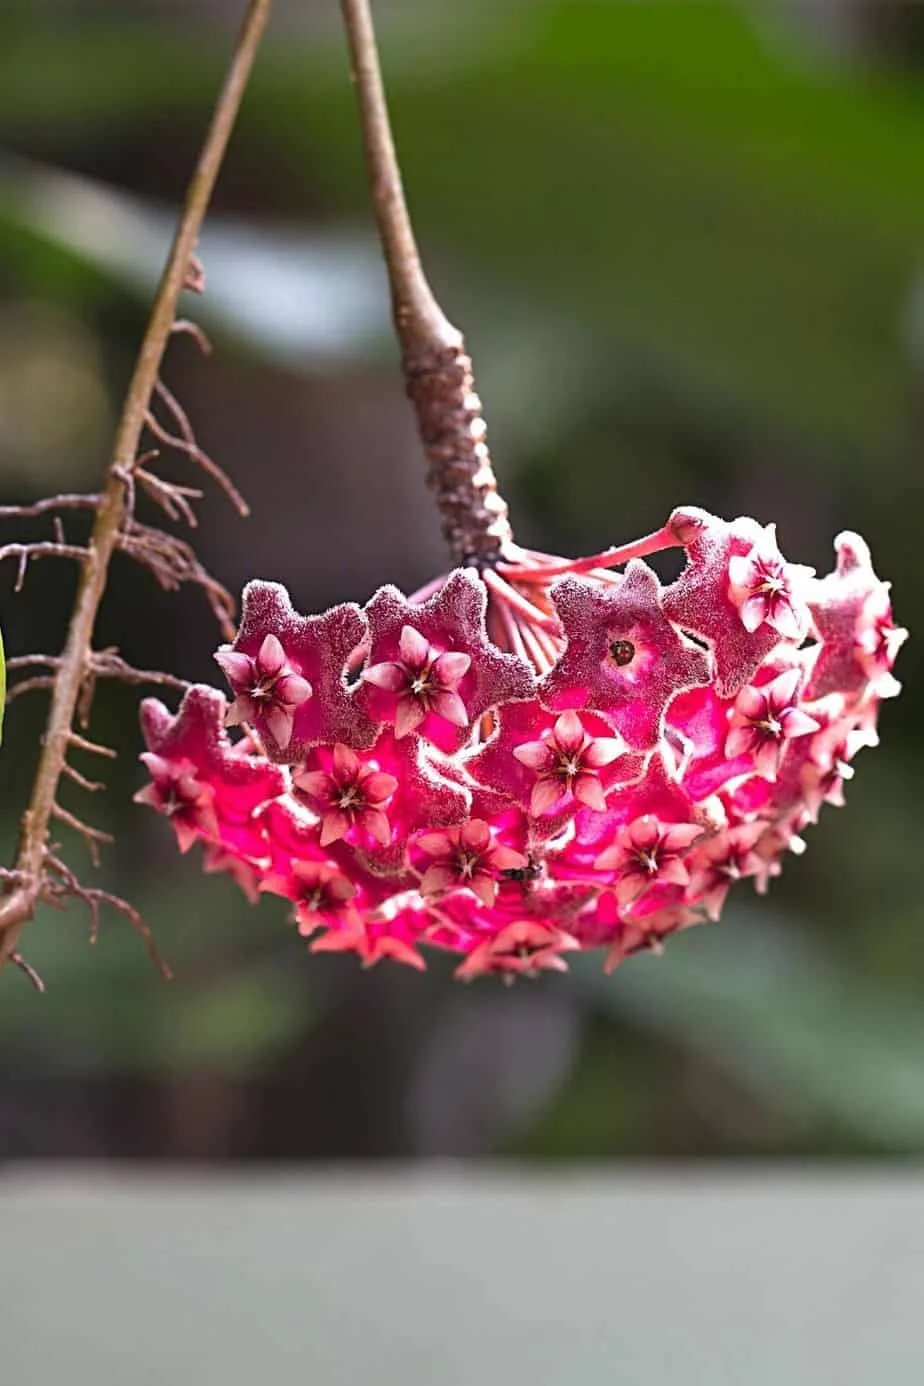 Hoya Pubicalyx is another variety of Hoya that can climb